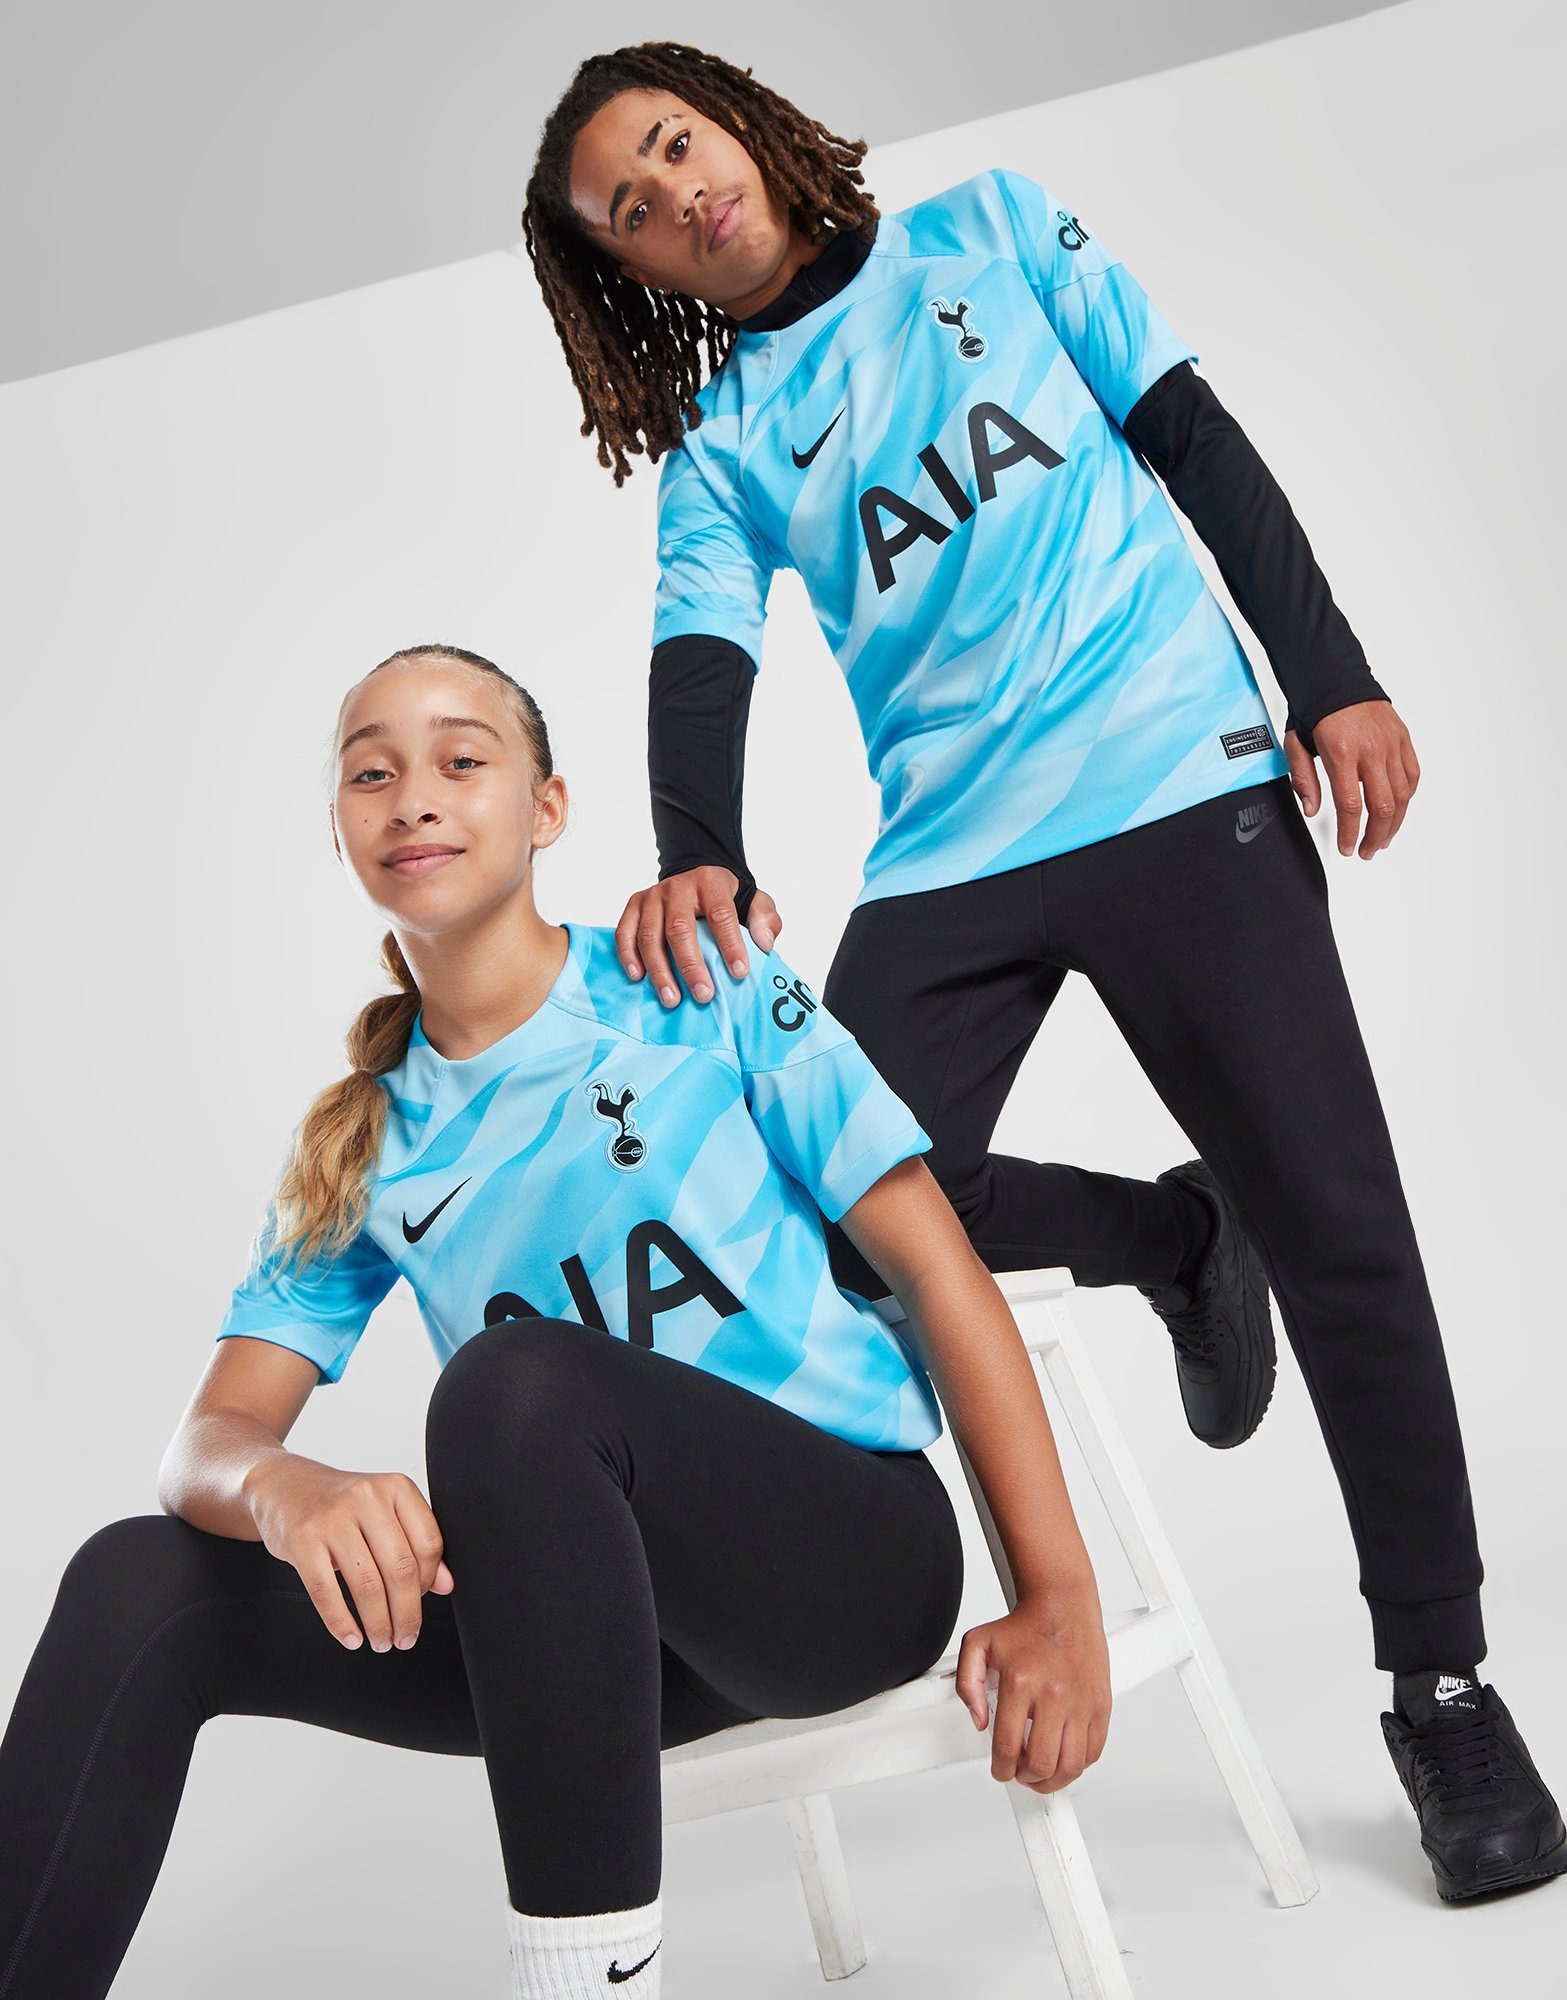 New Tottenham Hotspur Nike 2020/21 kits: Release date confirmed, info on  all 4 kits and photos 